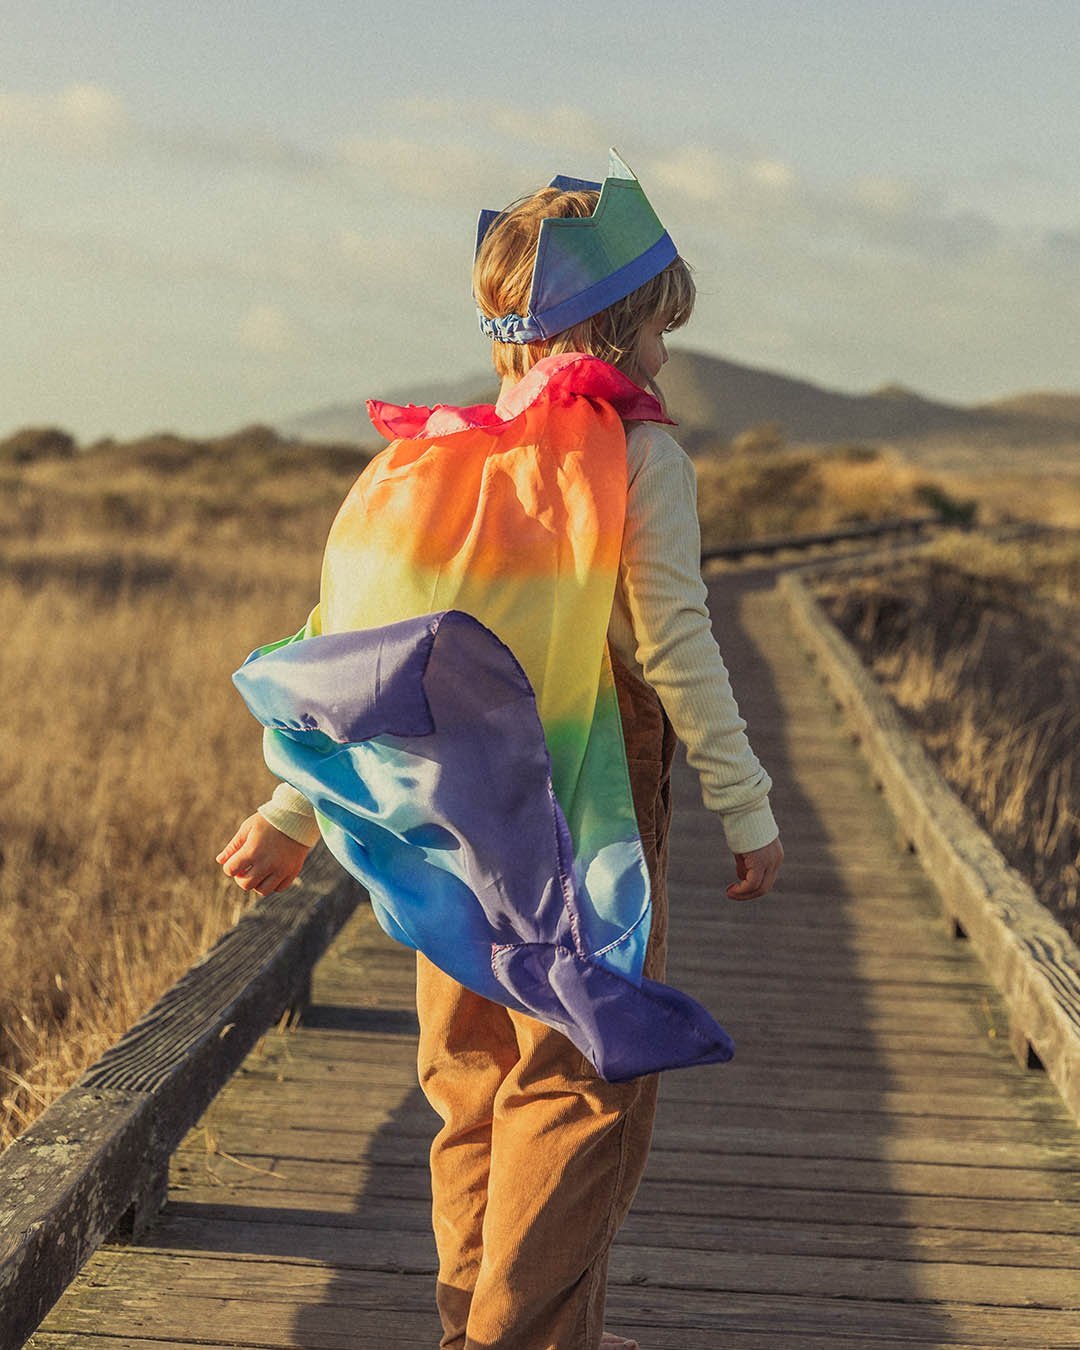 Child with rainbow cape and crown on a board walk with dried grass fields to the sides